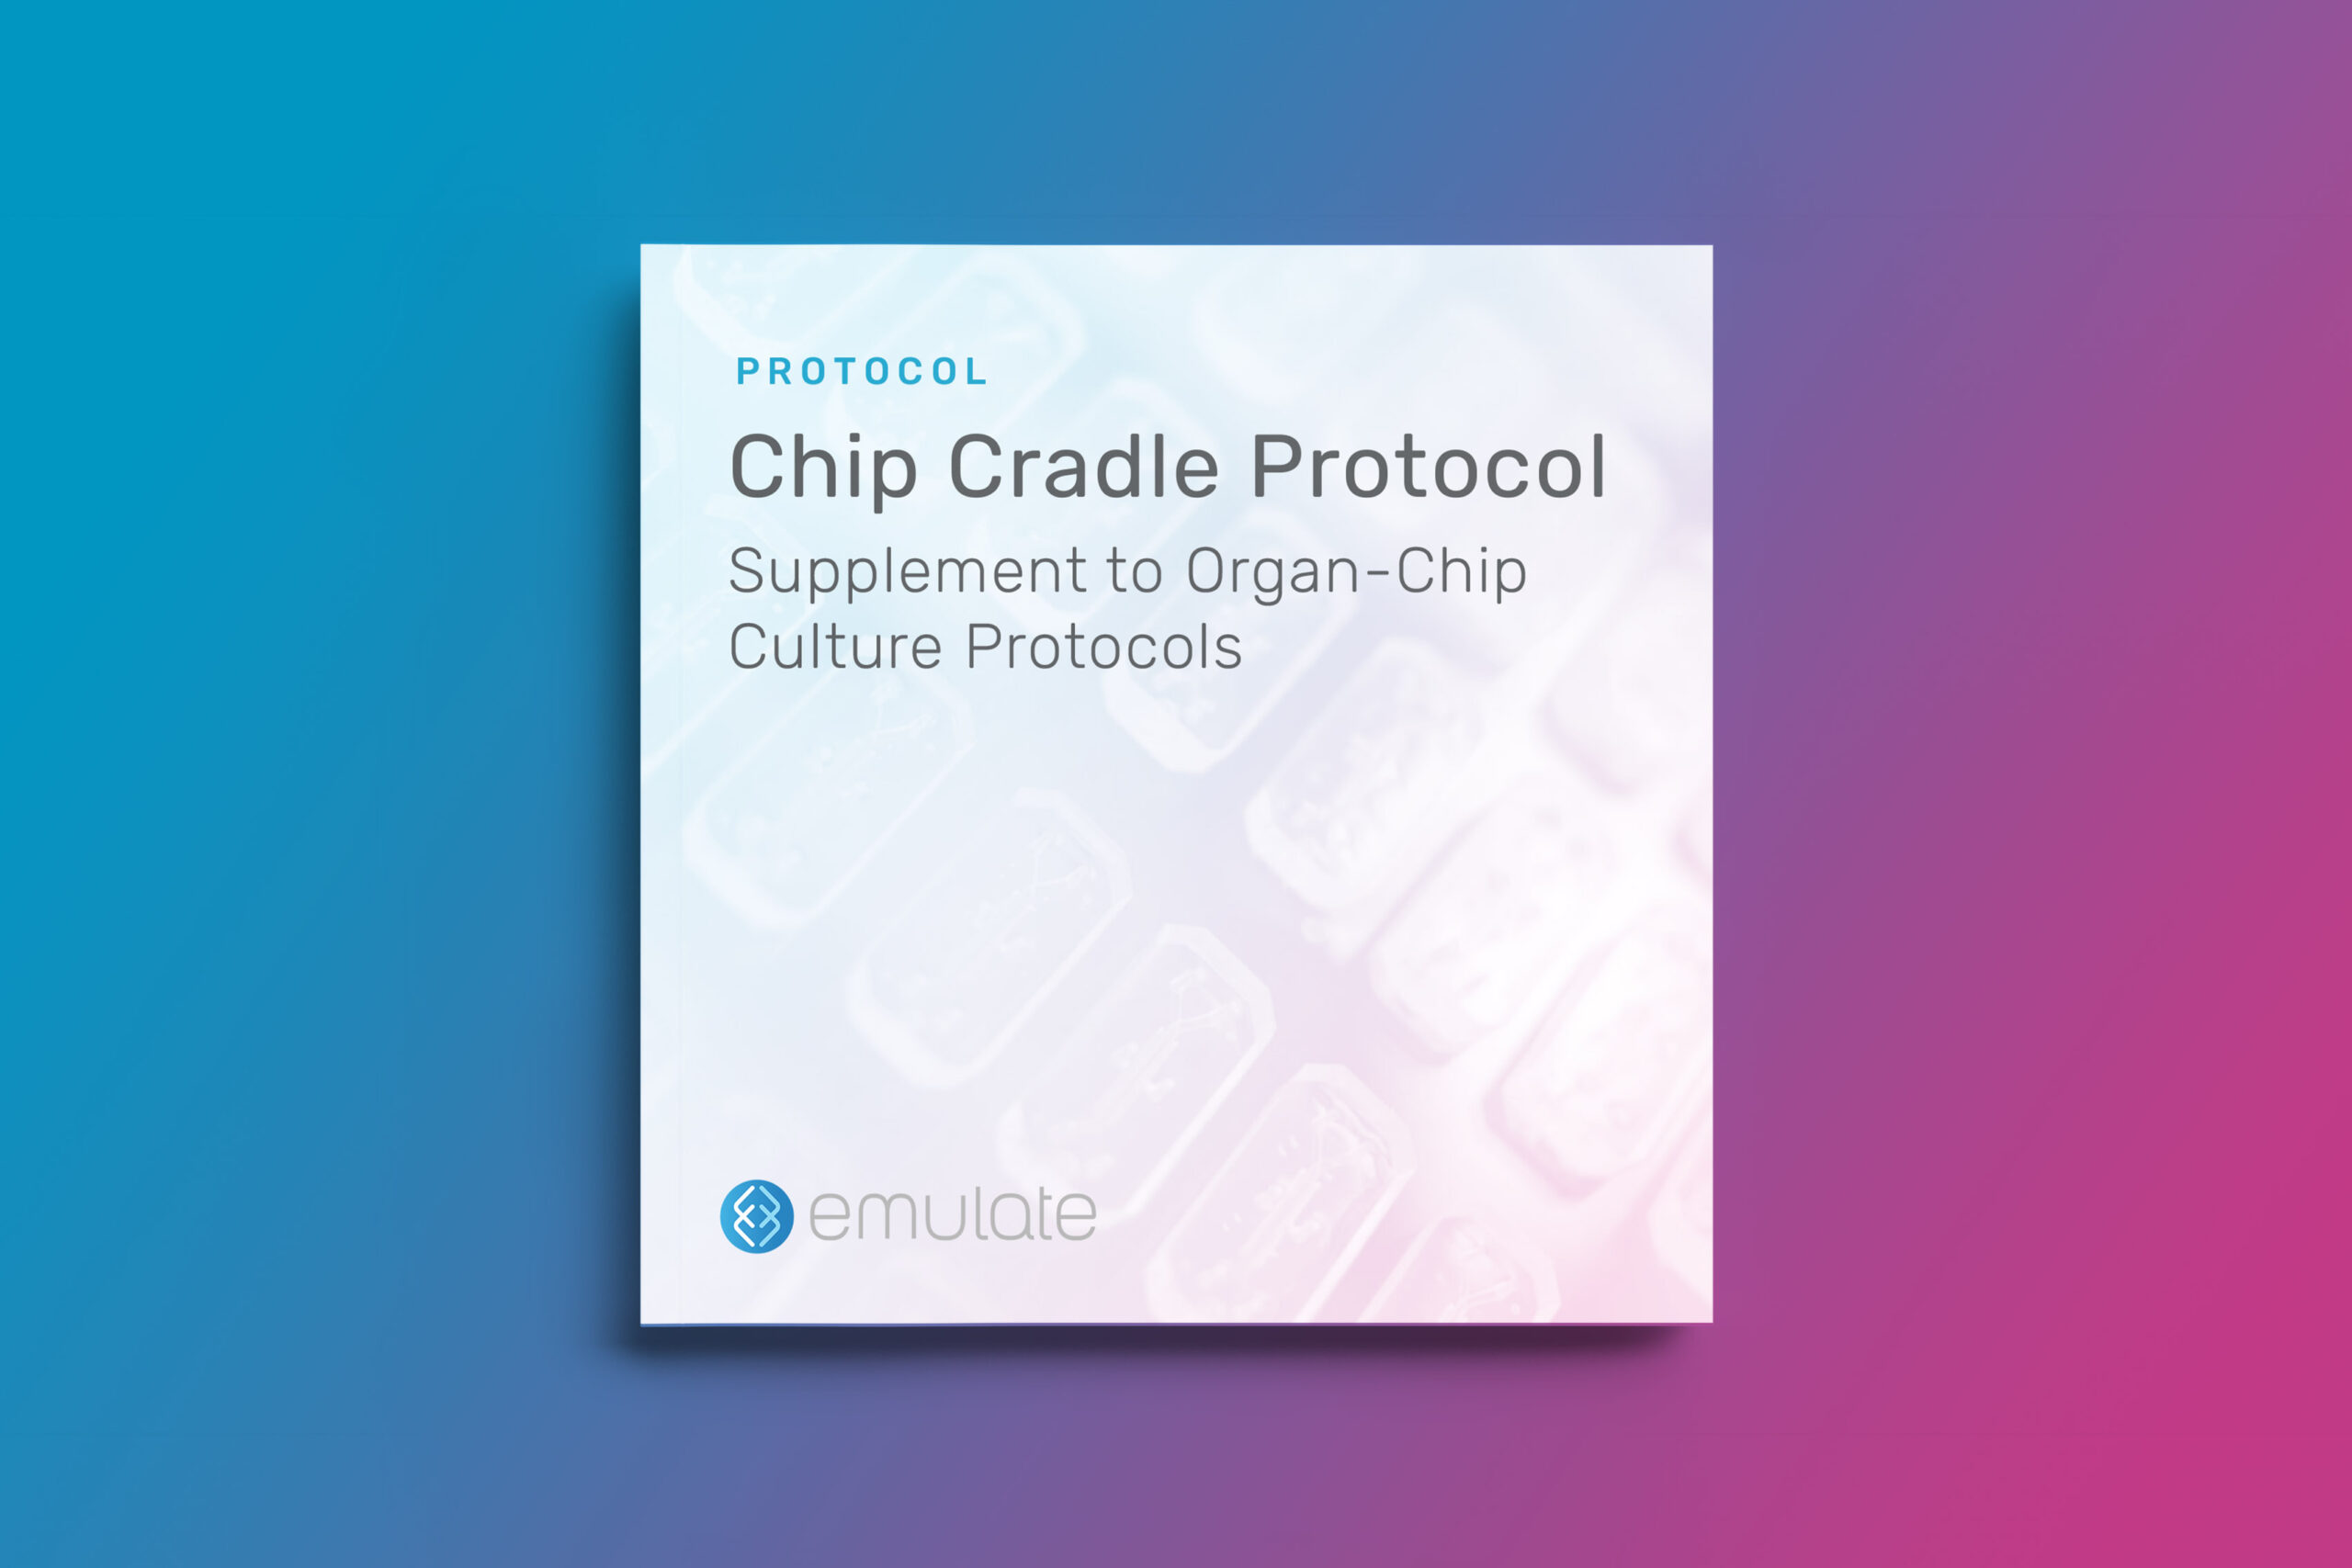 Chip Cradle Protocol (Supplement to Organ-Chip Culture Protocols)